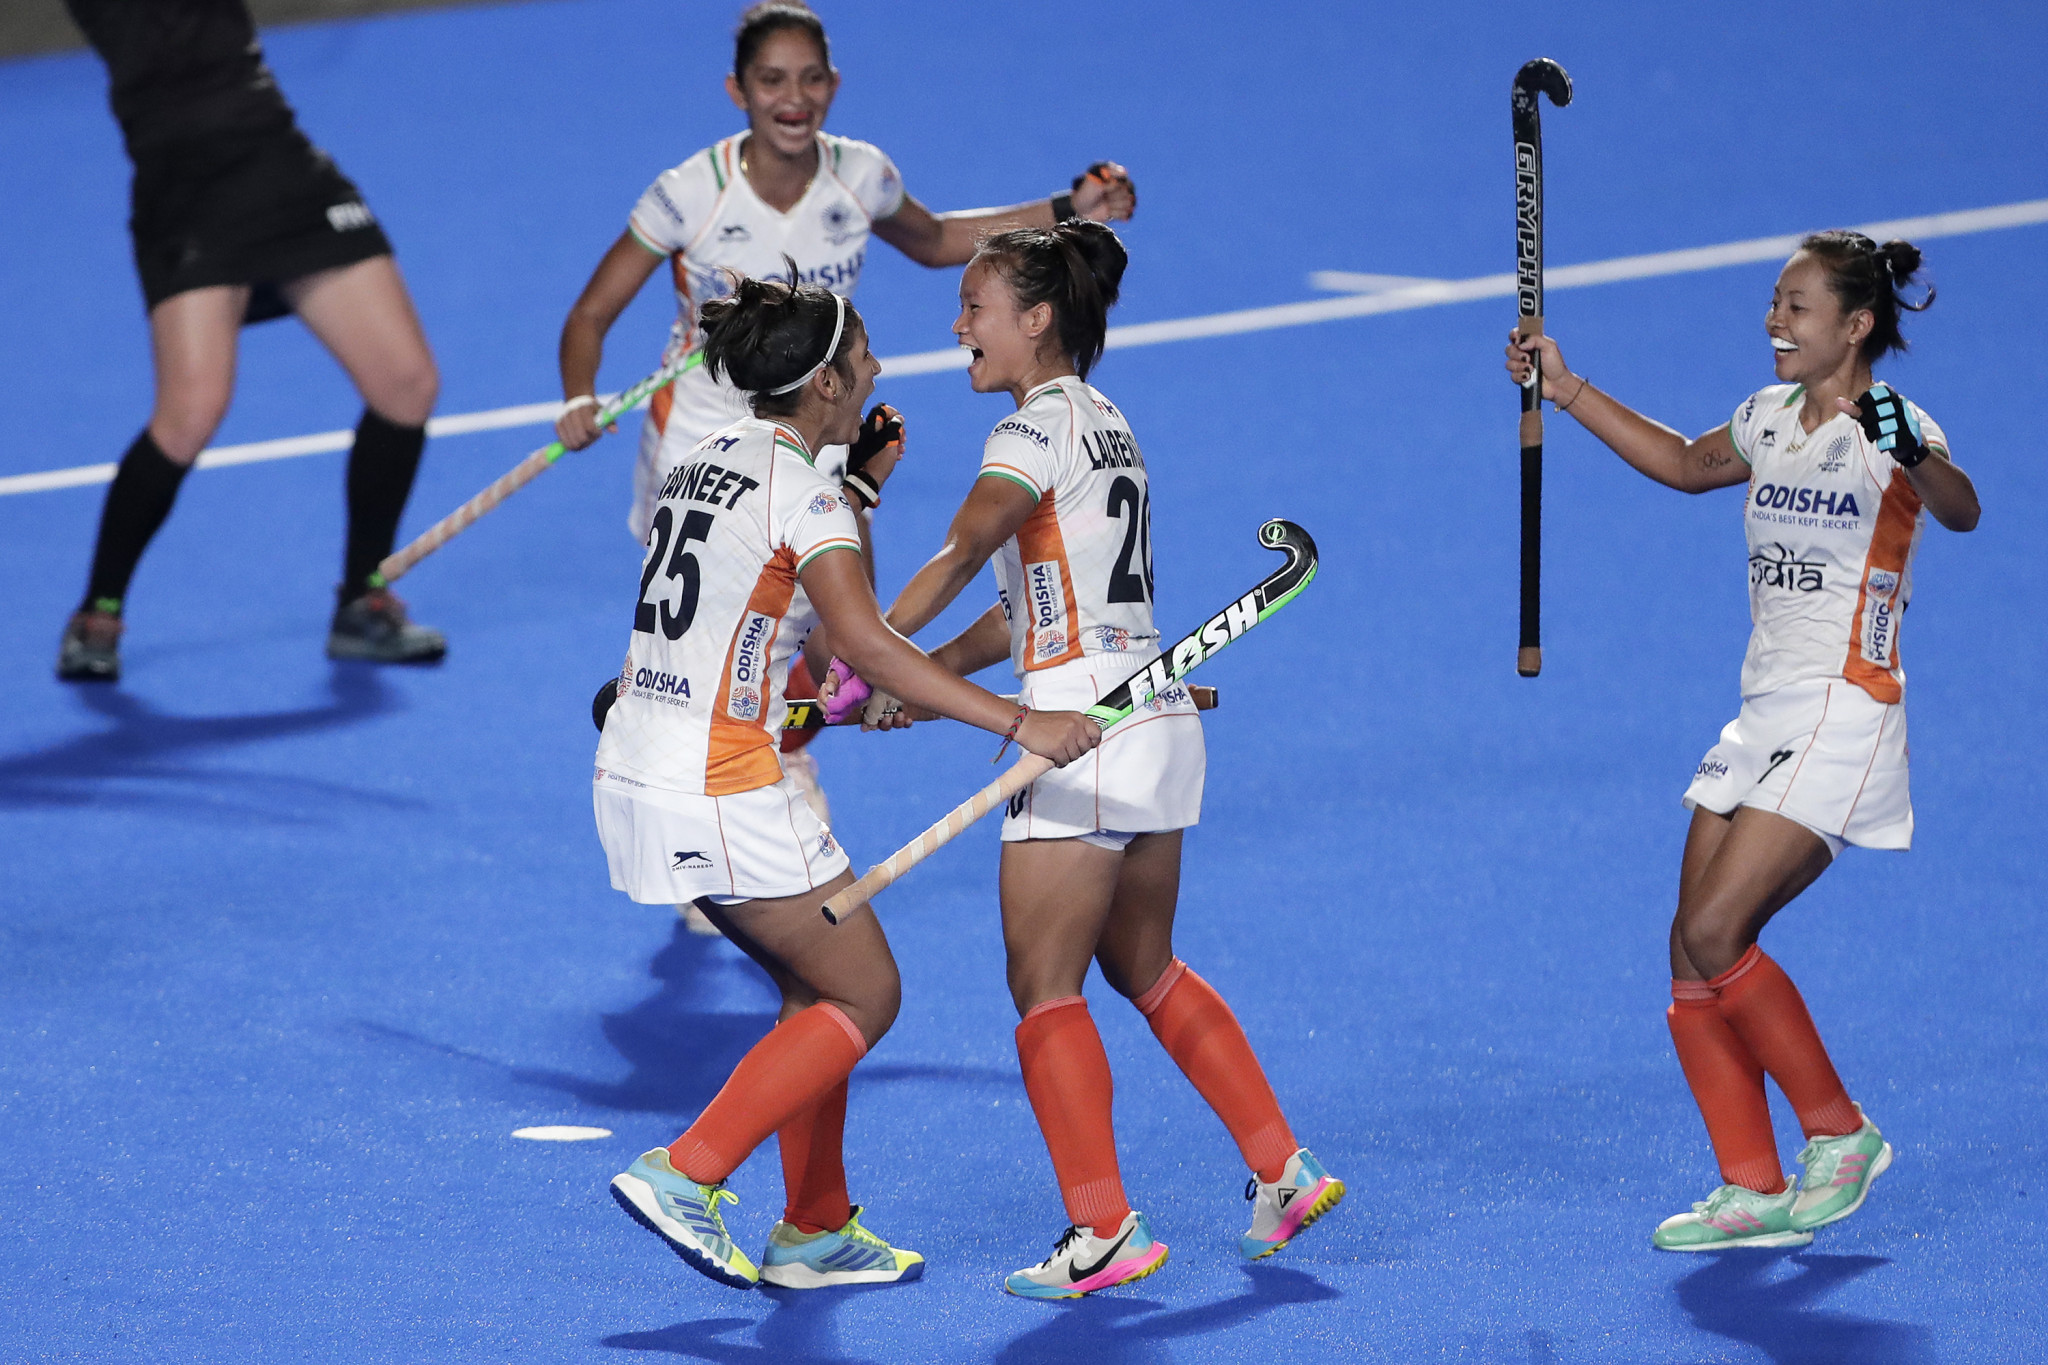 India women's hockey team are preparing to make their third appearance at an Olympic Games ©Getty Images